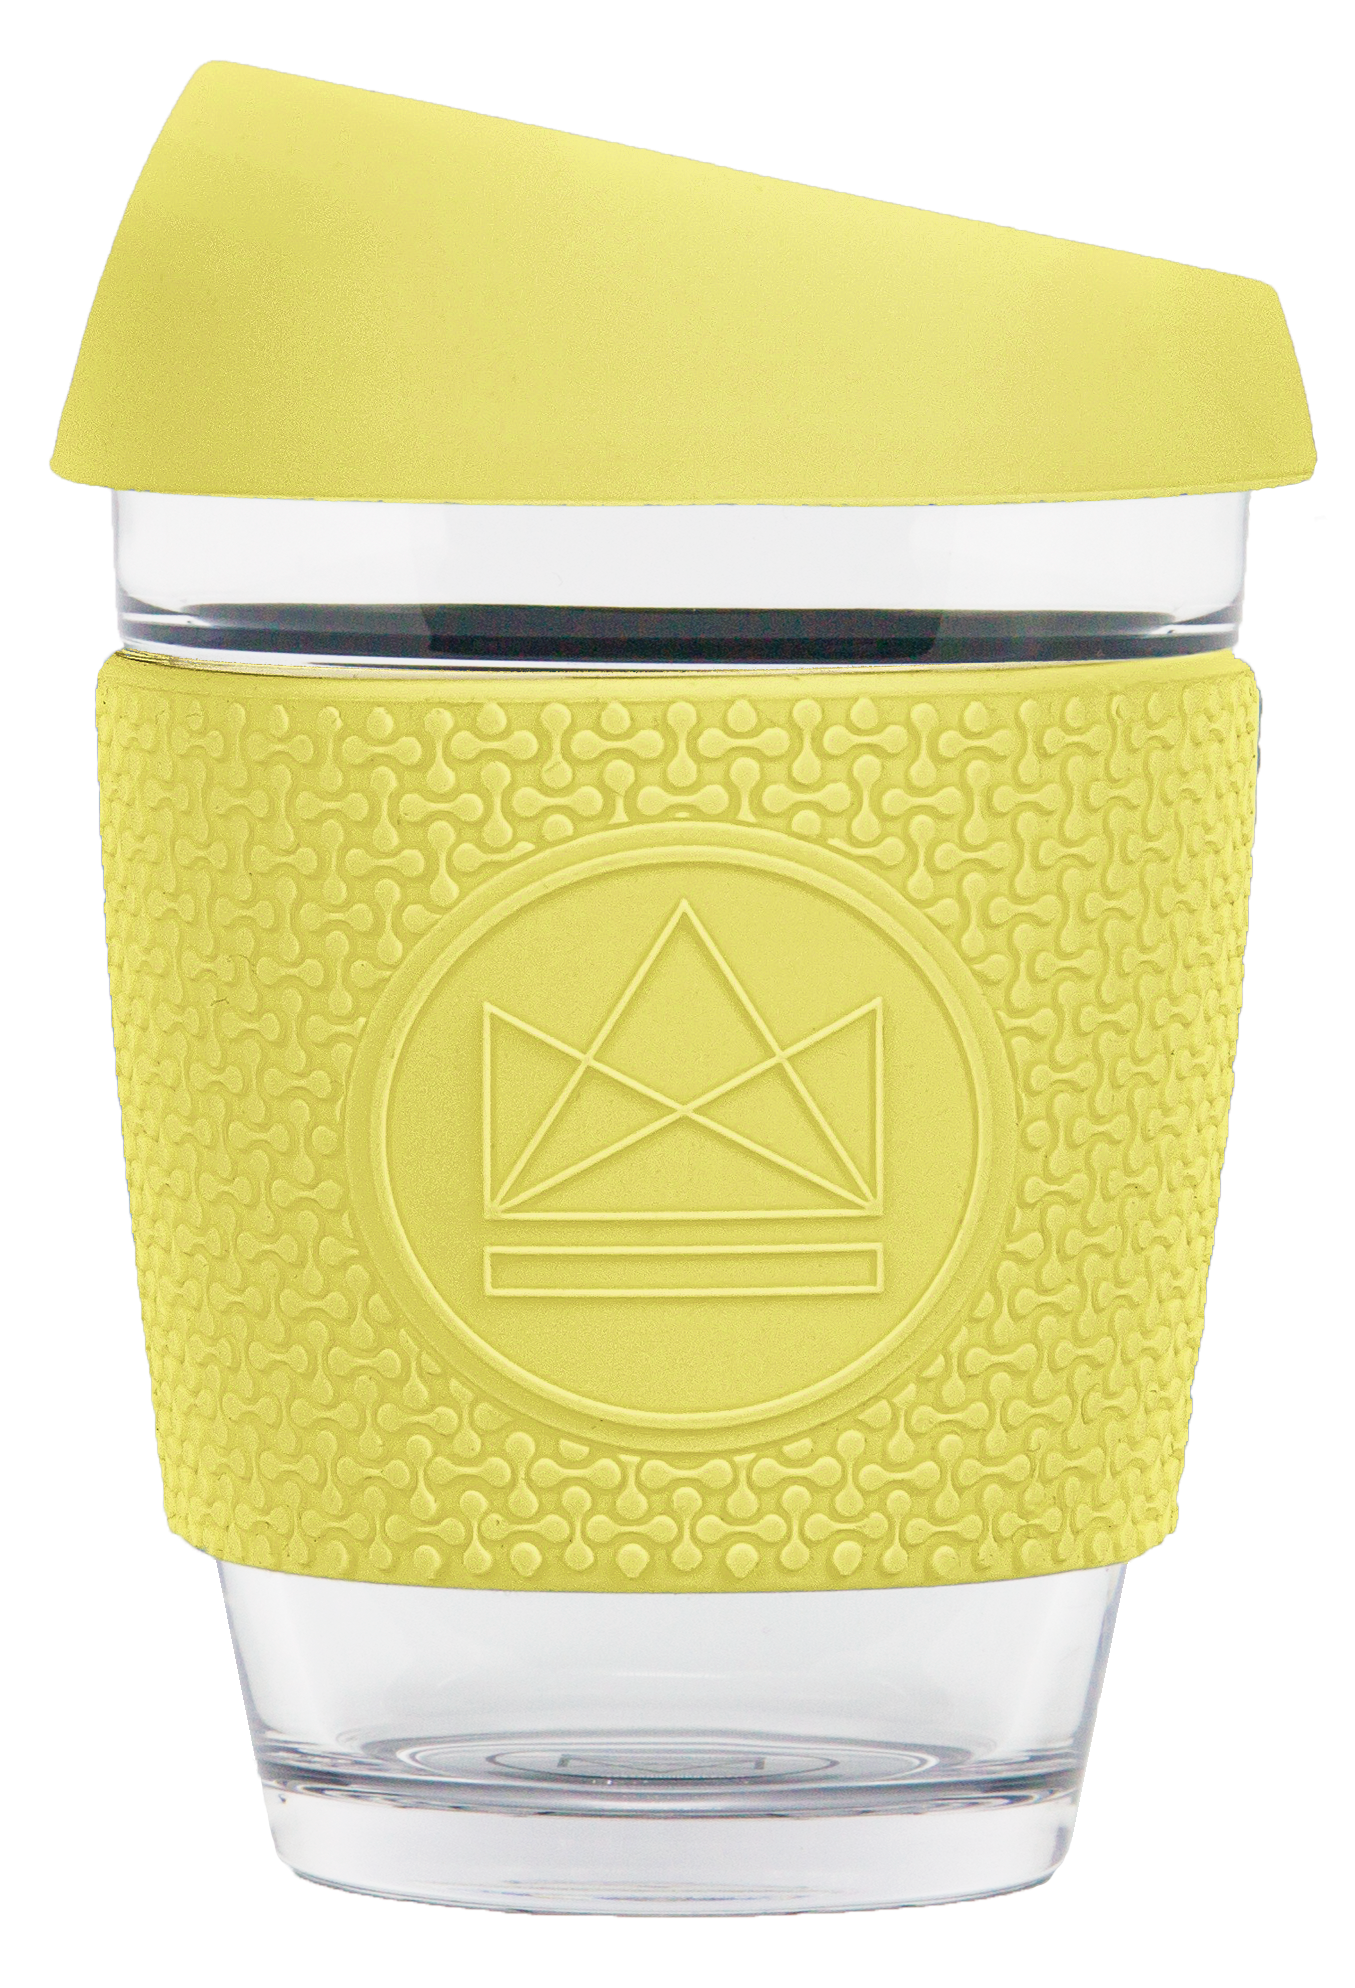 Neon Kactus Reusable Glass Coffee Cup With Thermal Sleeve 12oz - Sun in Shining